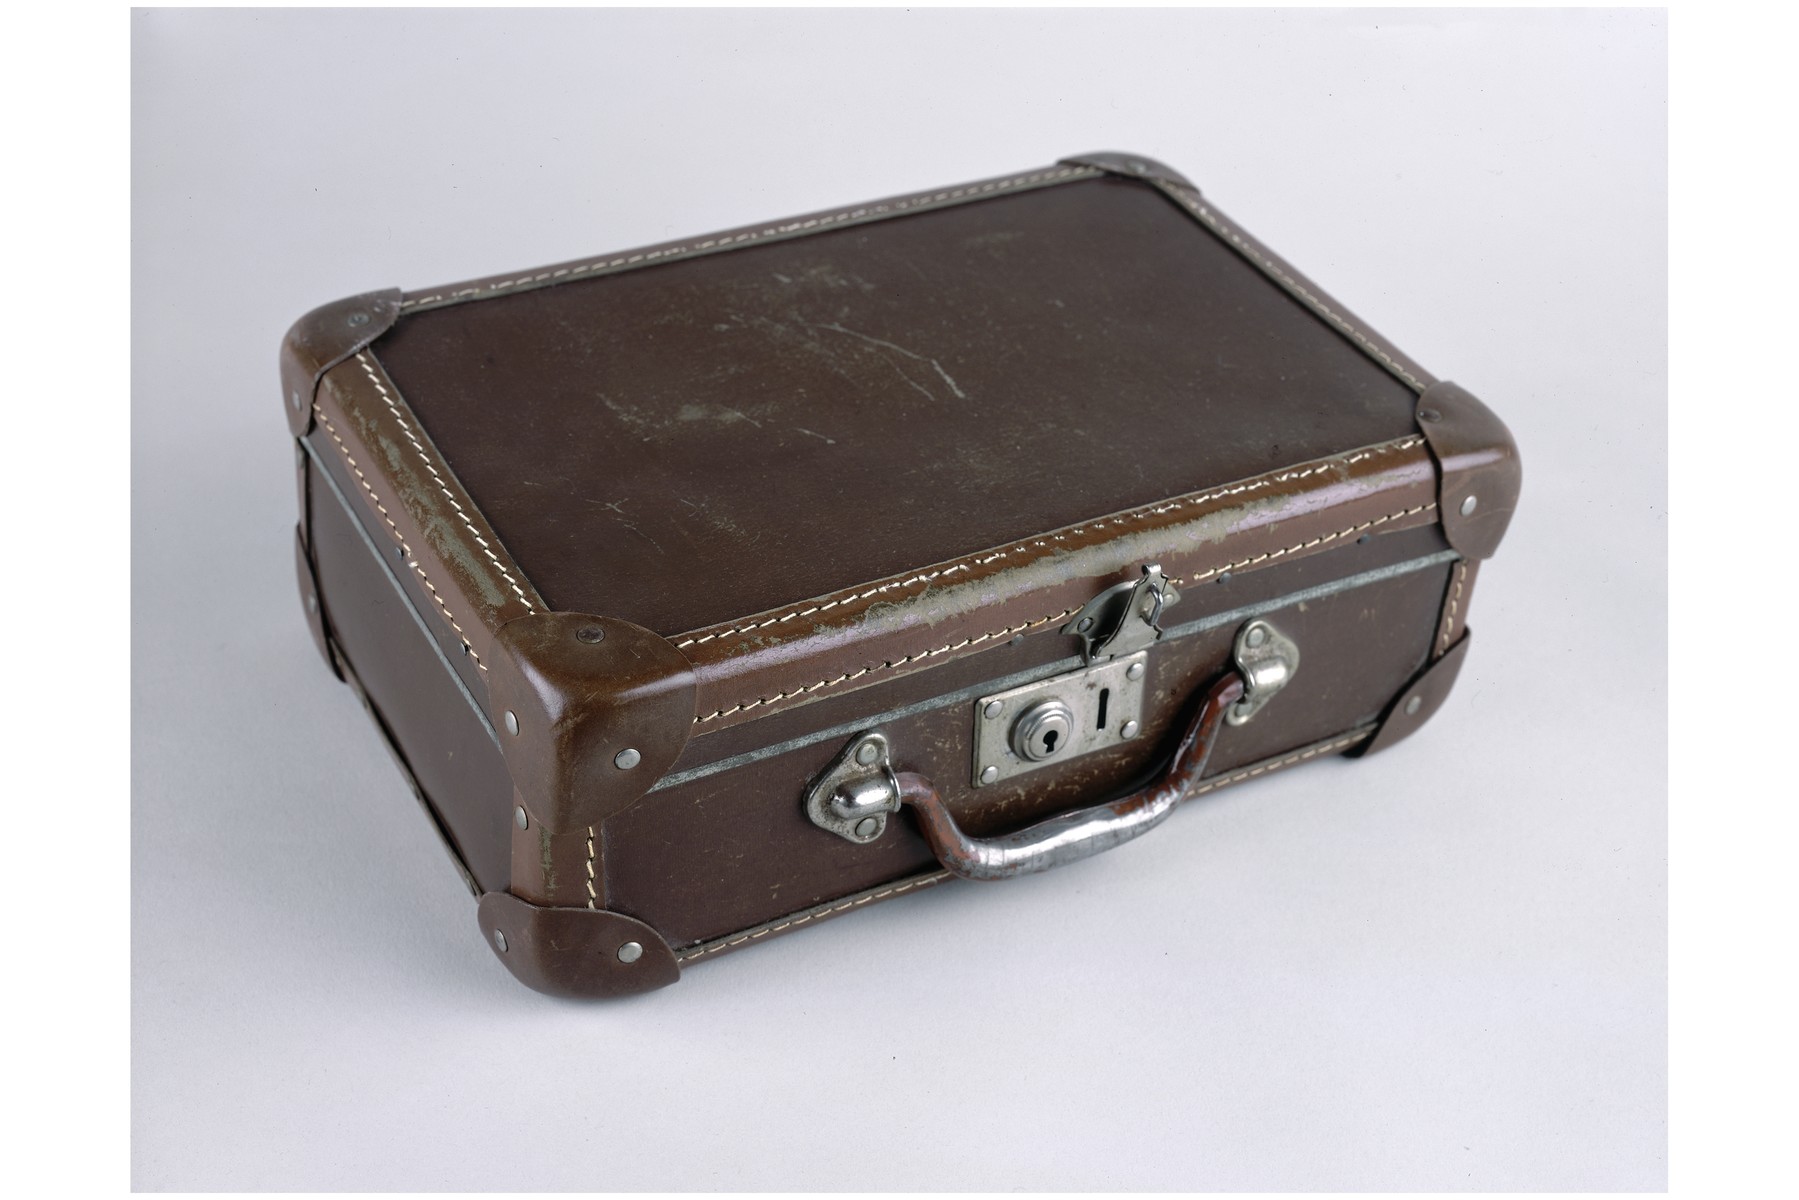 A brown leather suitcase carried by George Pick in Hungary.